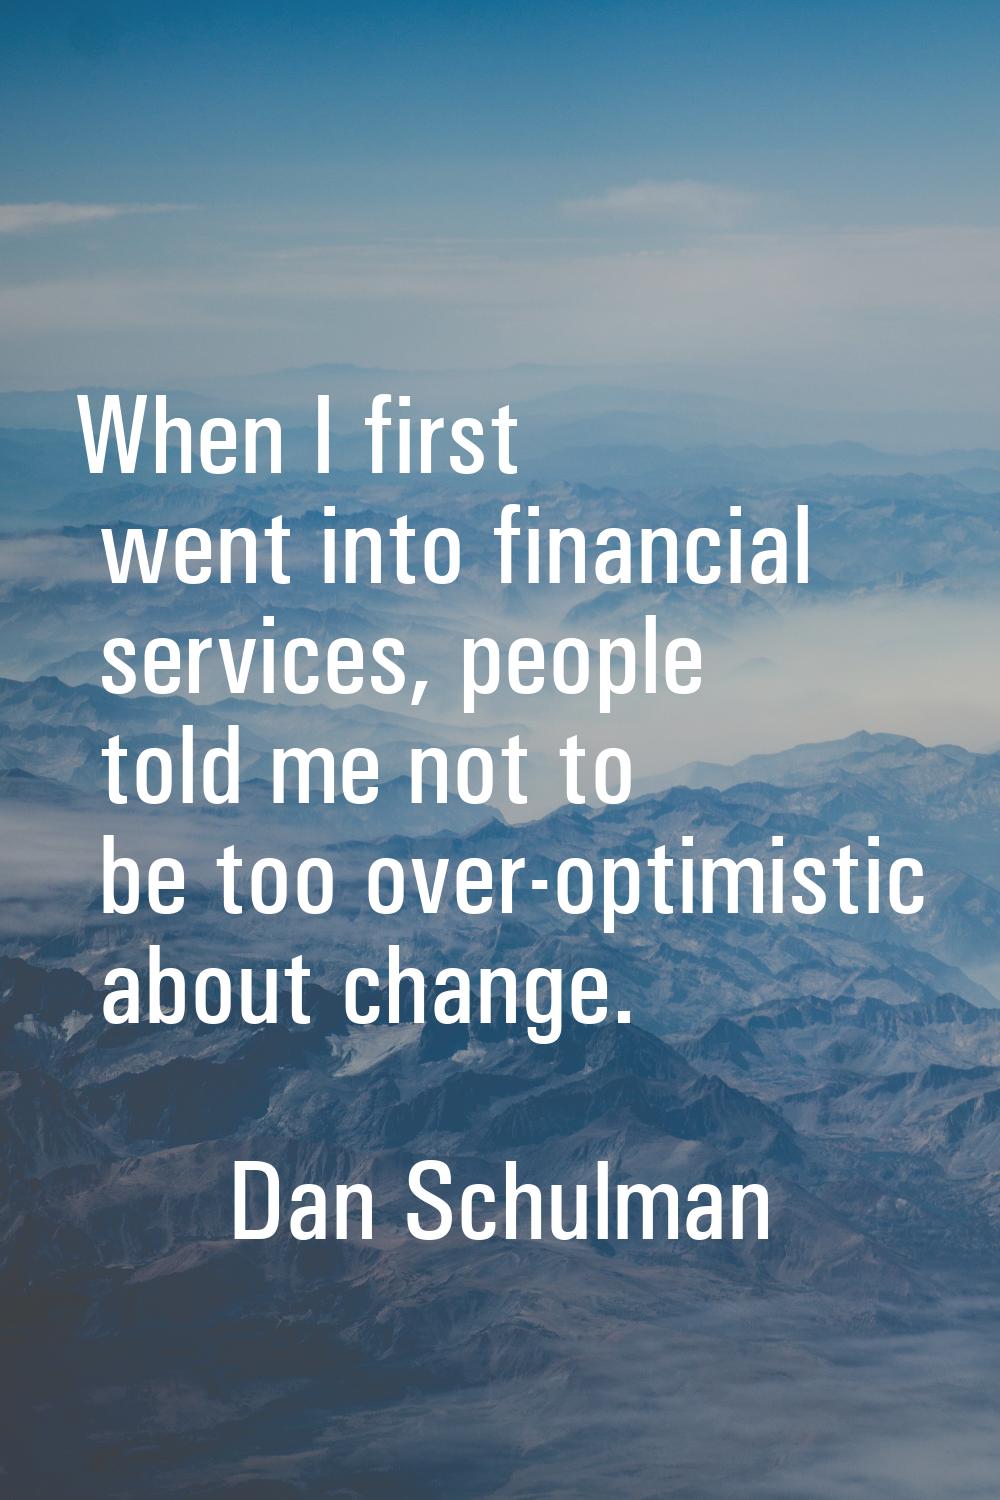 When I first went into financial services, people told me not to be too over-optimistic about chang